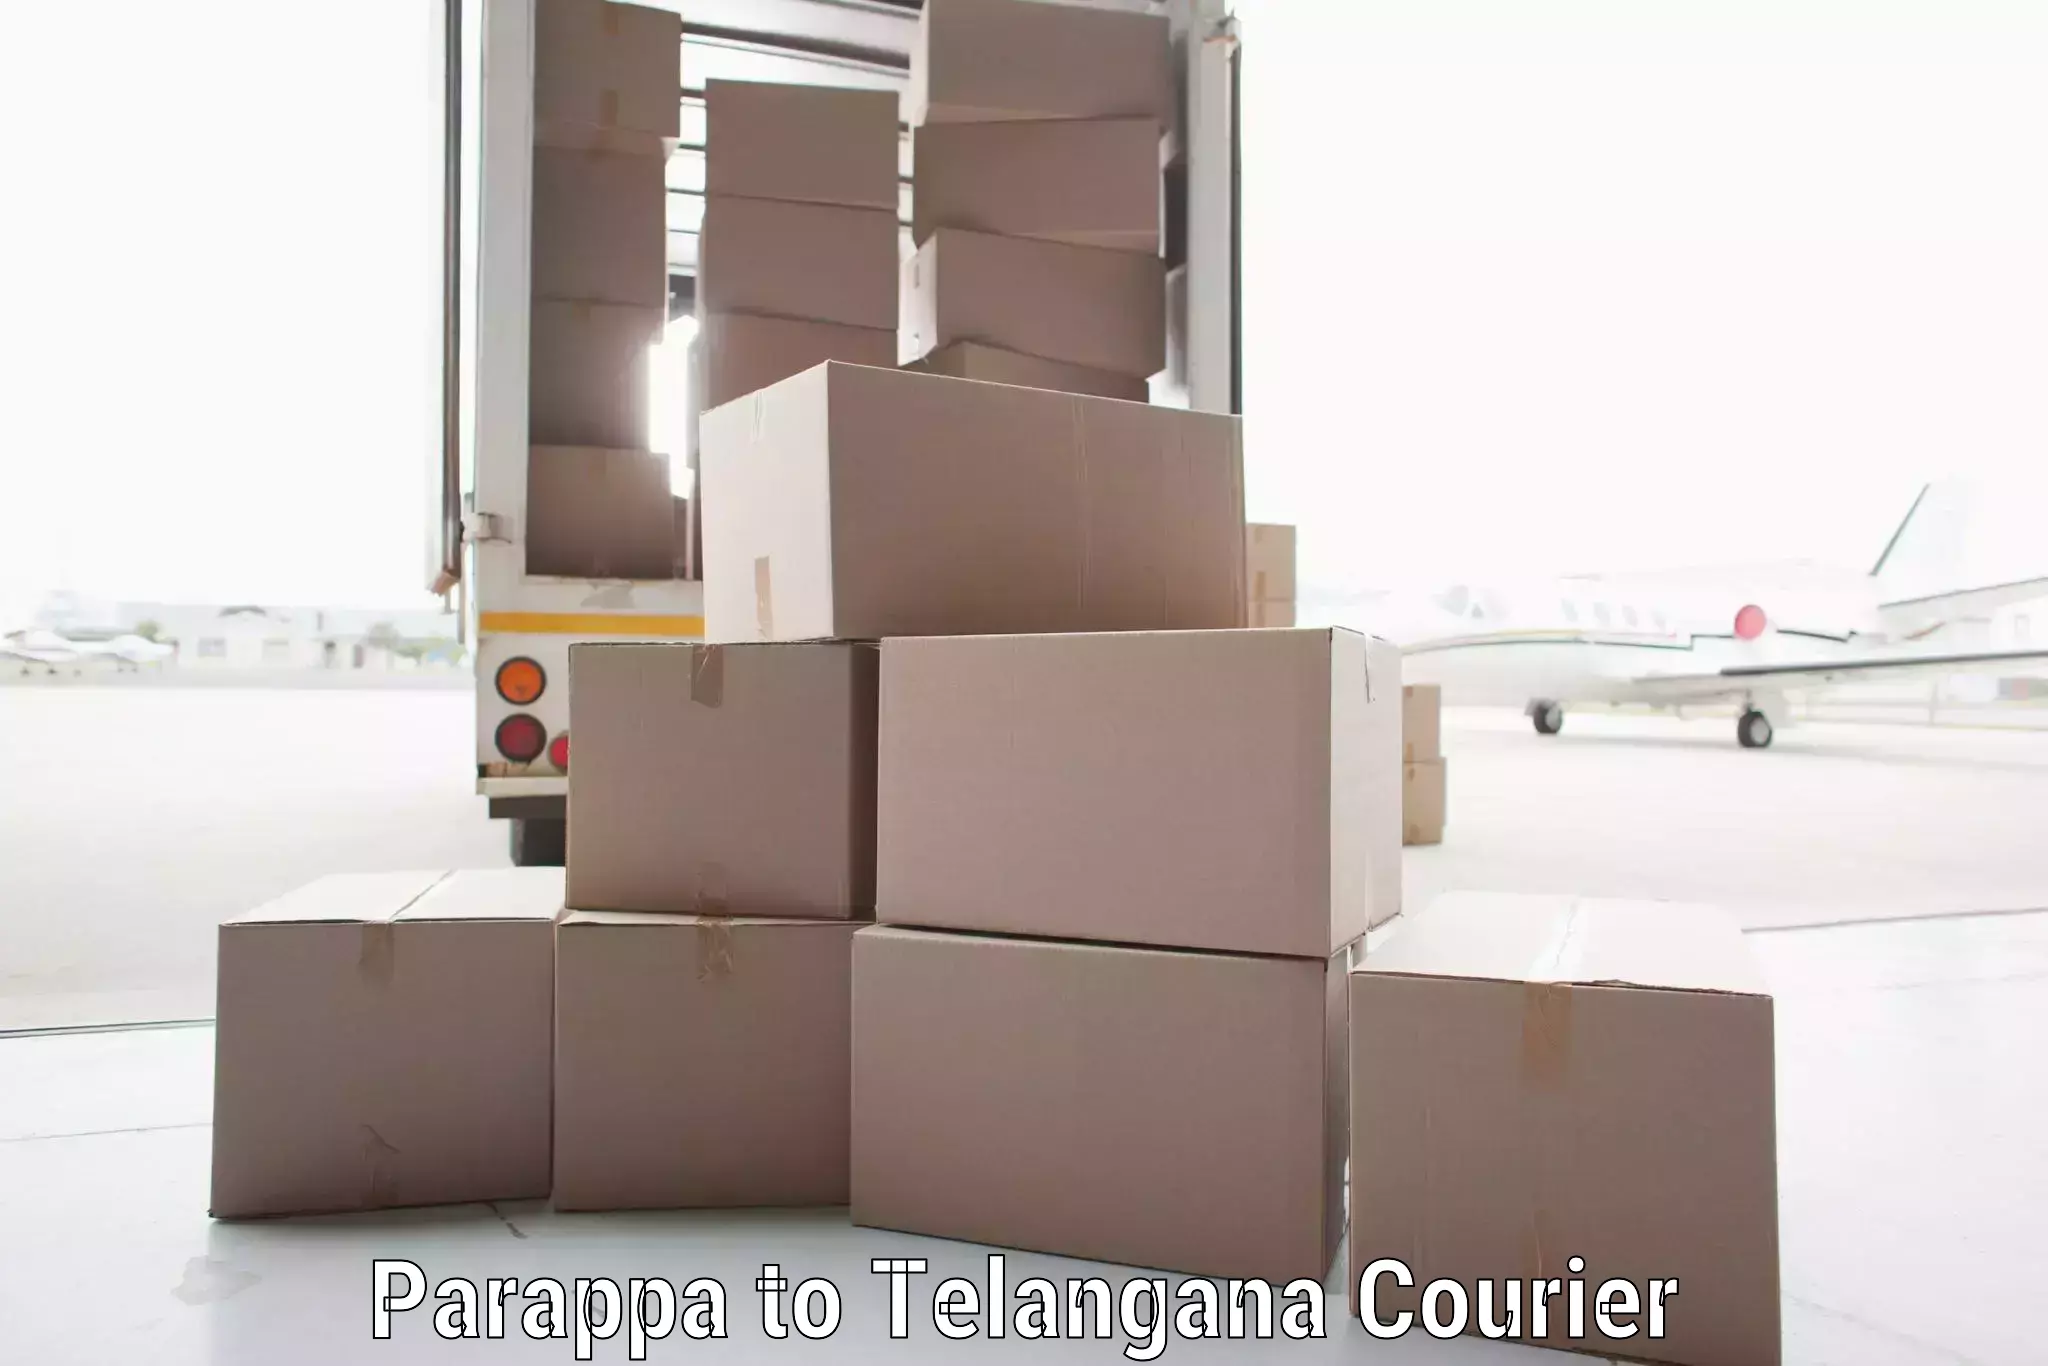 Scheduled delivery Parappa to Telangana